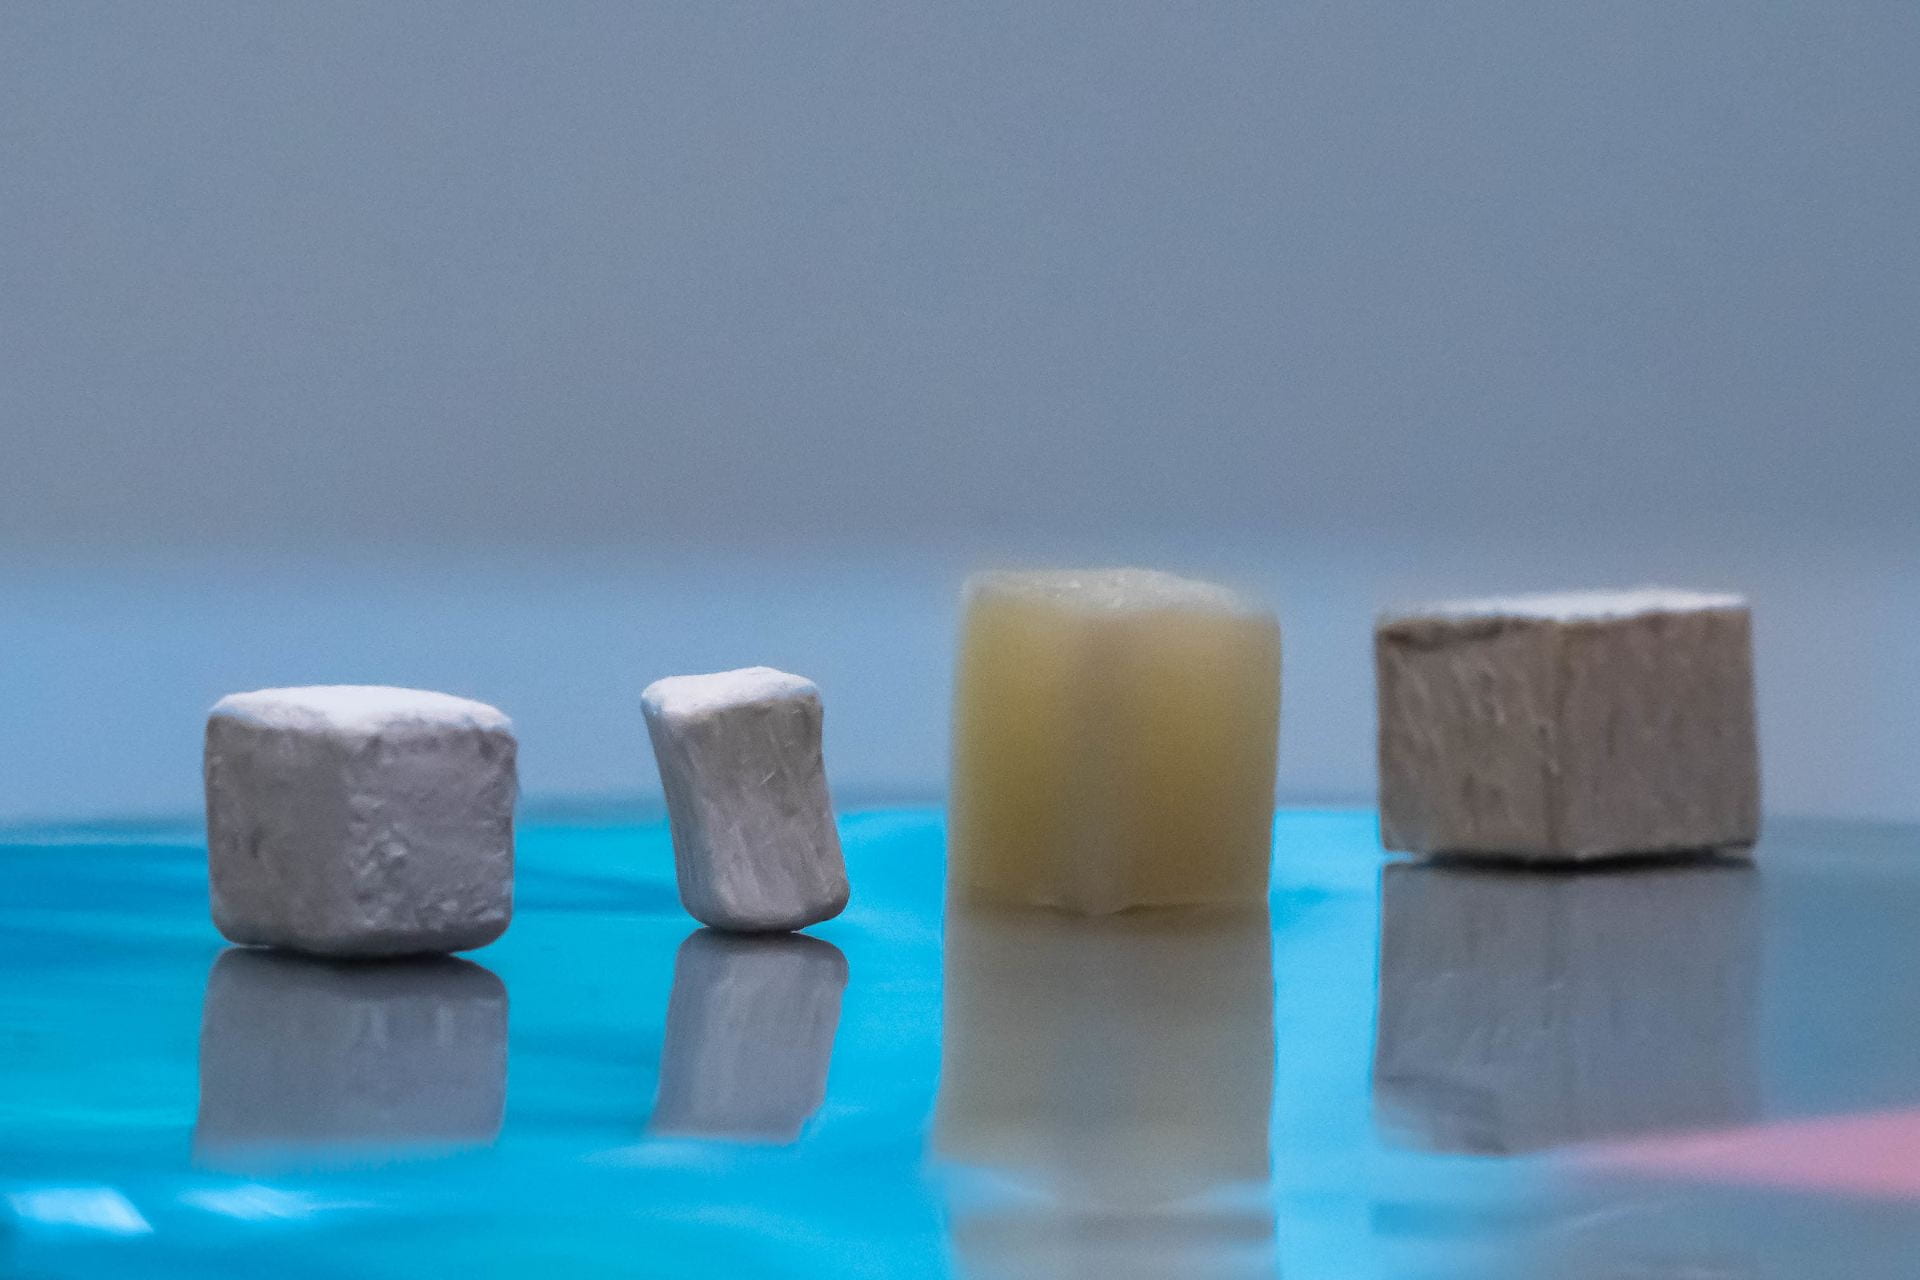 Wood pieces at different stages of modification, from natural (far right) to delignified (second from right) to dried, bleached and delignified (second from left) and MOF-infused functional wood (first on the left). (Photo by Gustavo Raskosky/Rice University)